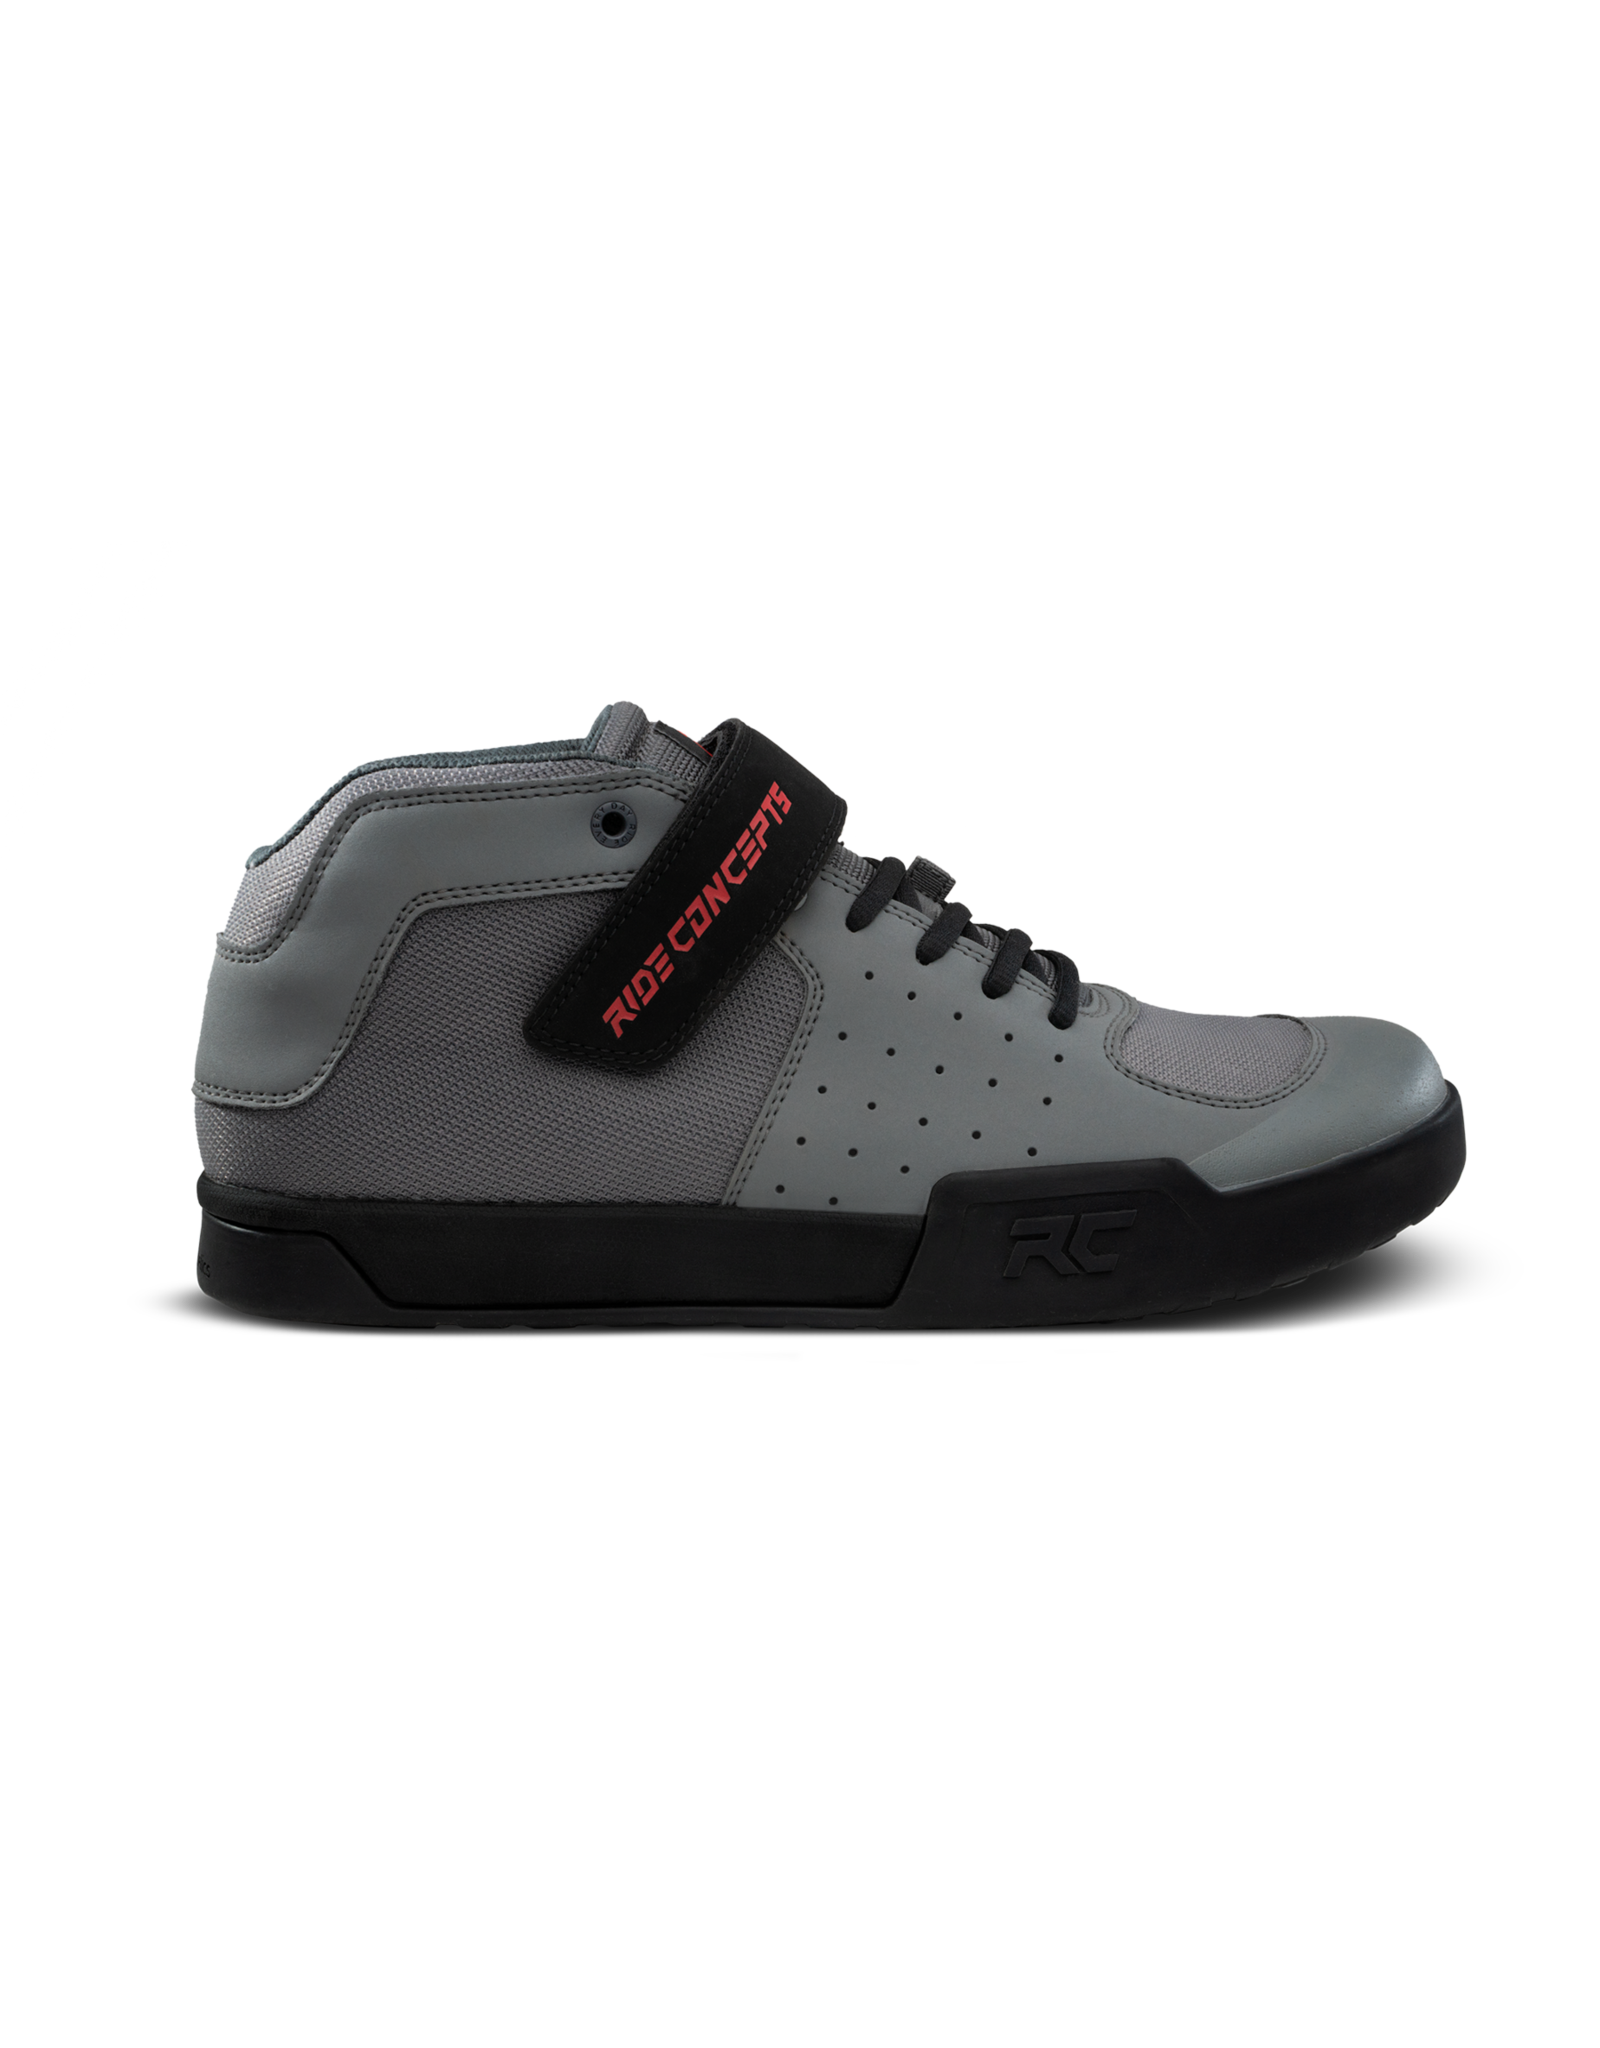 Ride Concept Ride Concepts Wildcat 42.0 Charcoal/Red